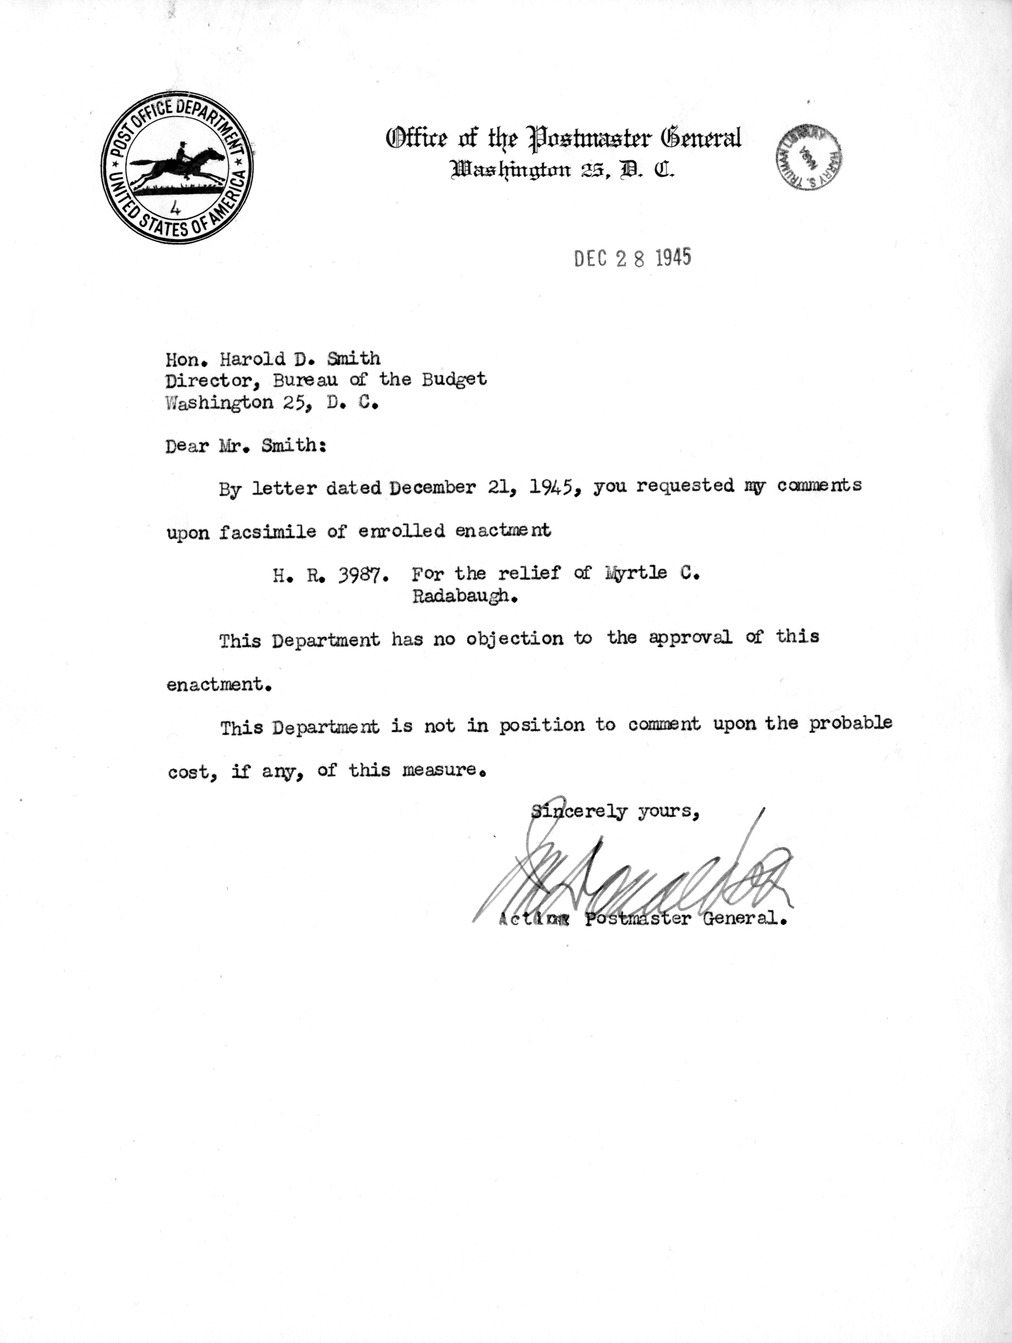 Memorandum from Frederick J. Bailey to M. C. Latta, H.R. 3987, For the Relief of Myrtle C. Radabaugh, with Attachments